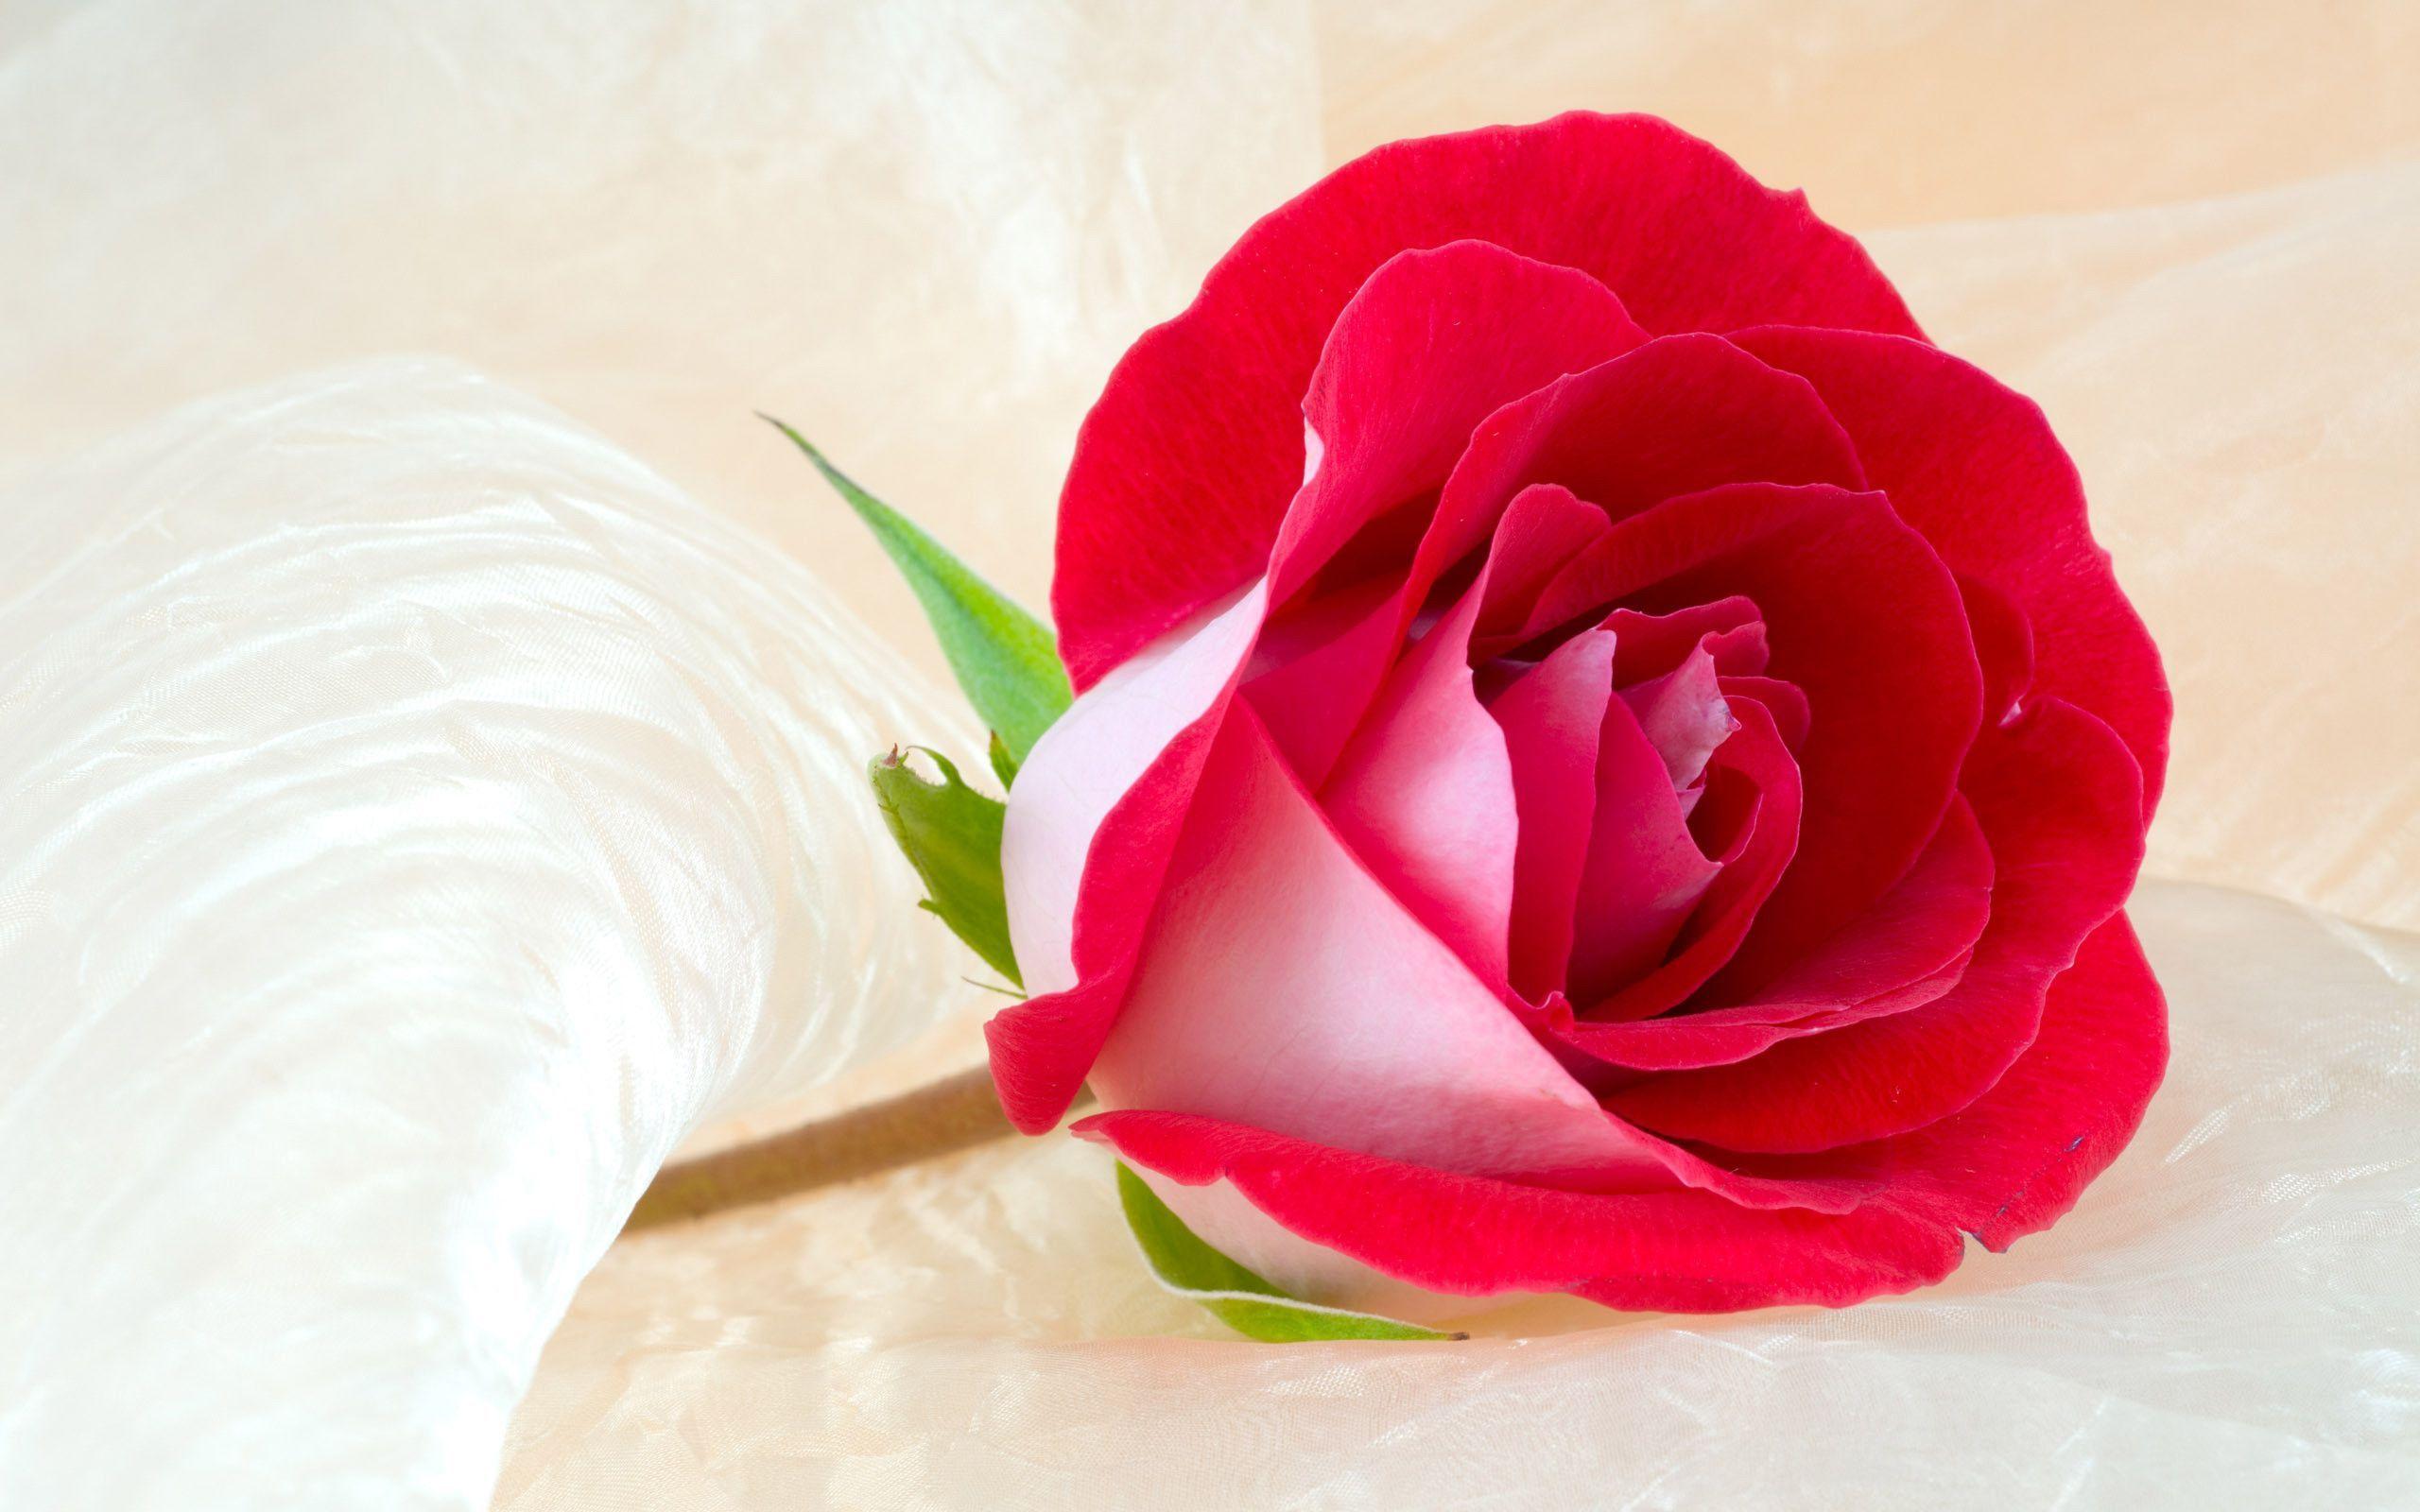 Rose Flowers Wallpaper Android Apps on Google Play. HD Wallpaper